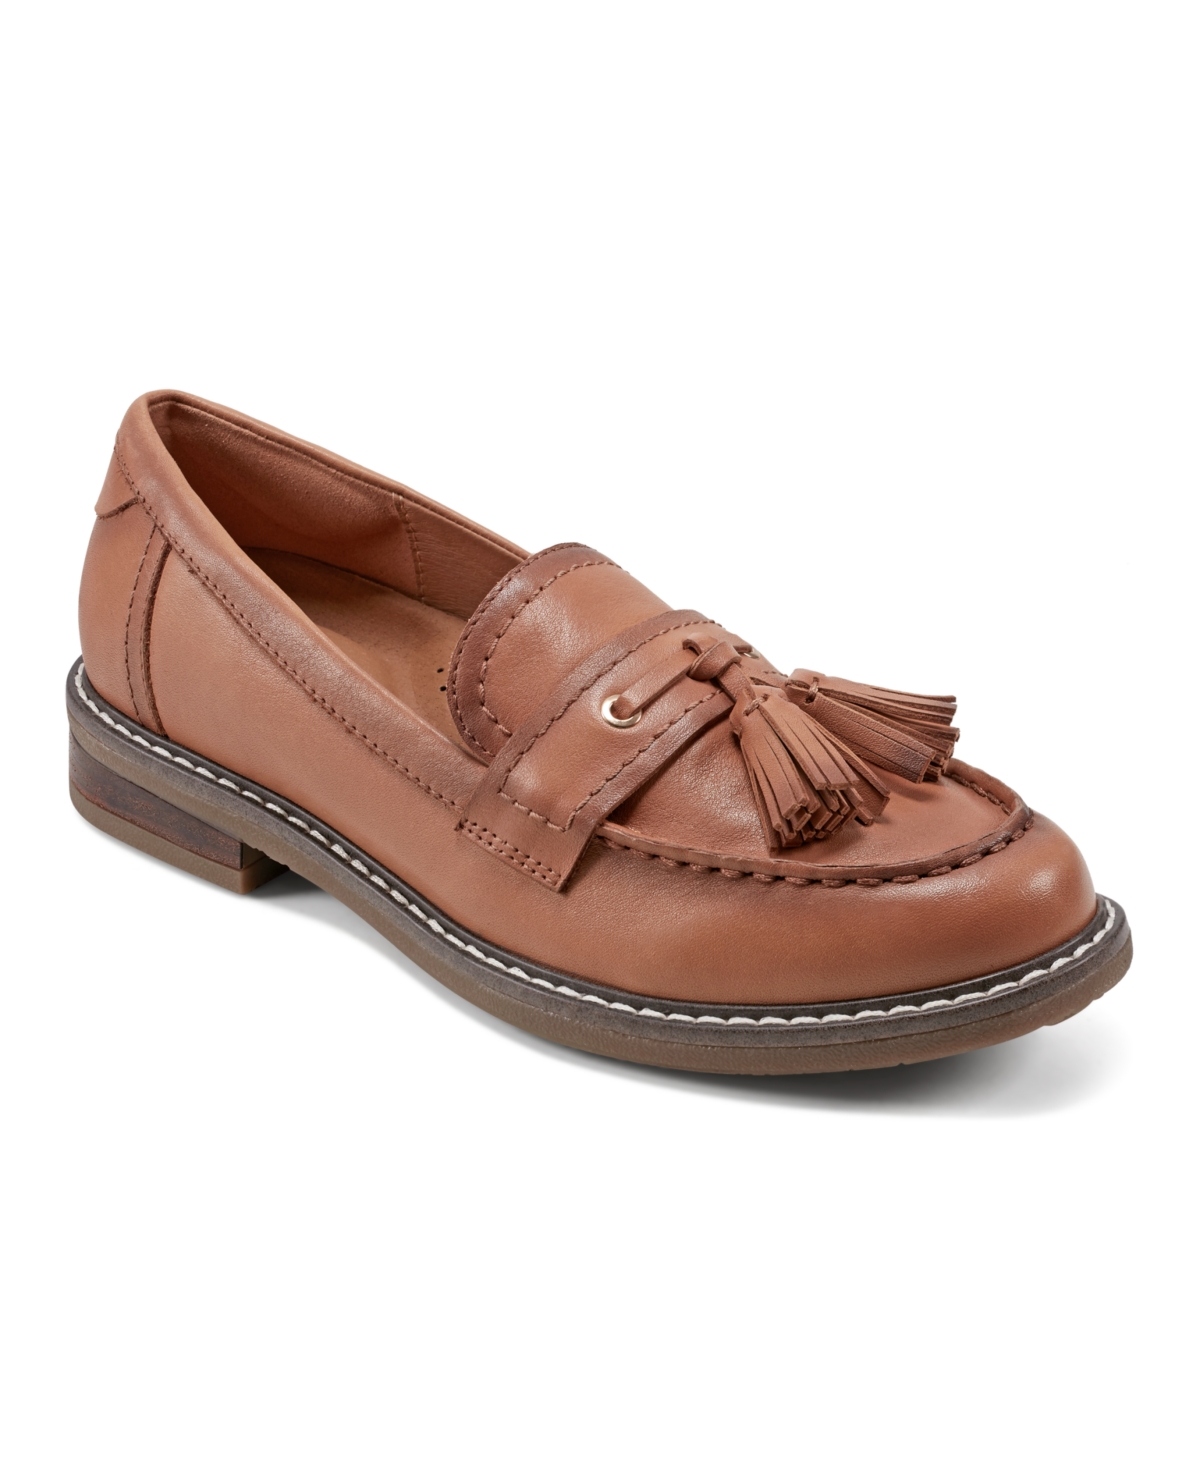 Women's Janelle Slip-On Round Toe Casual Loafers - Brown Leather